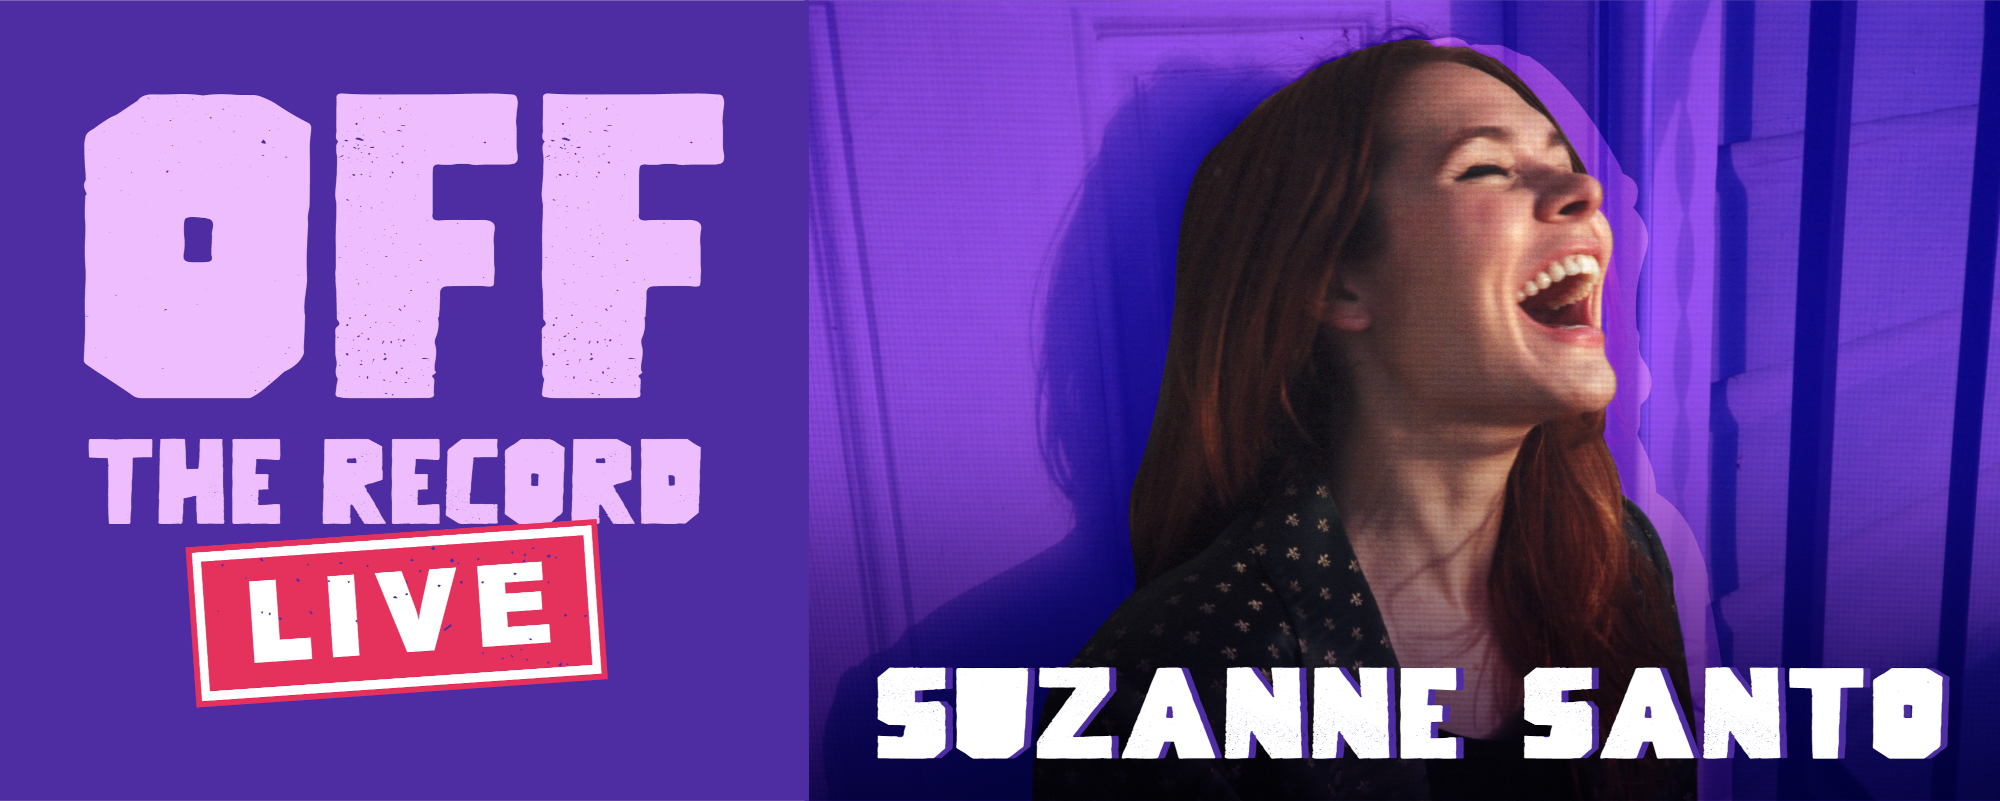 Off The Record Live: Suzanne Santo Talks Creative Process, Touring With Hozier and Writing Her New Album, ‘Yard Sale’